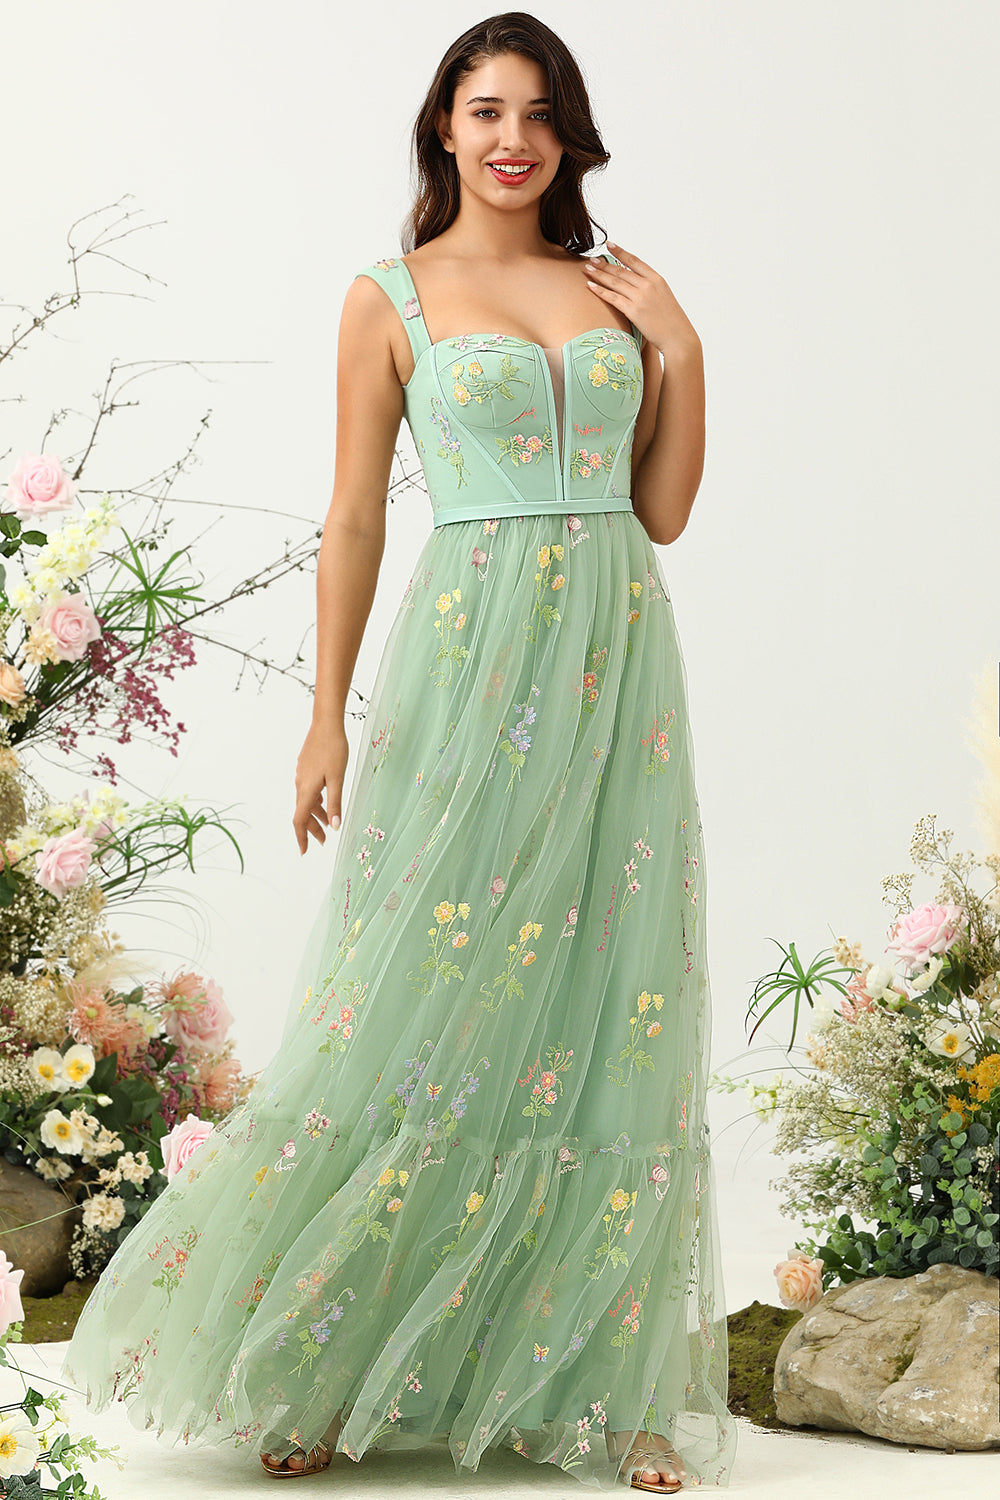 Gorgeous A-Line Square Neck Green Long Prom Dress with Embroidery